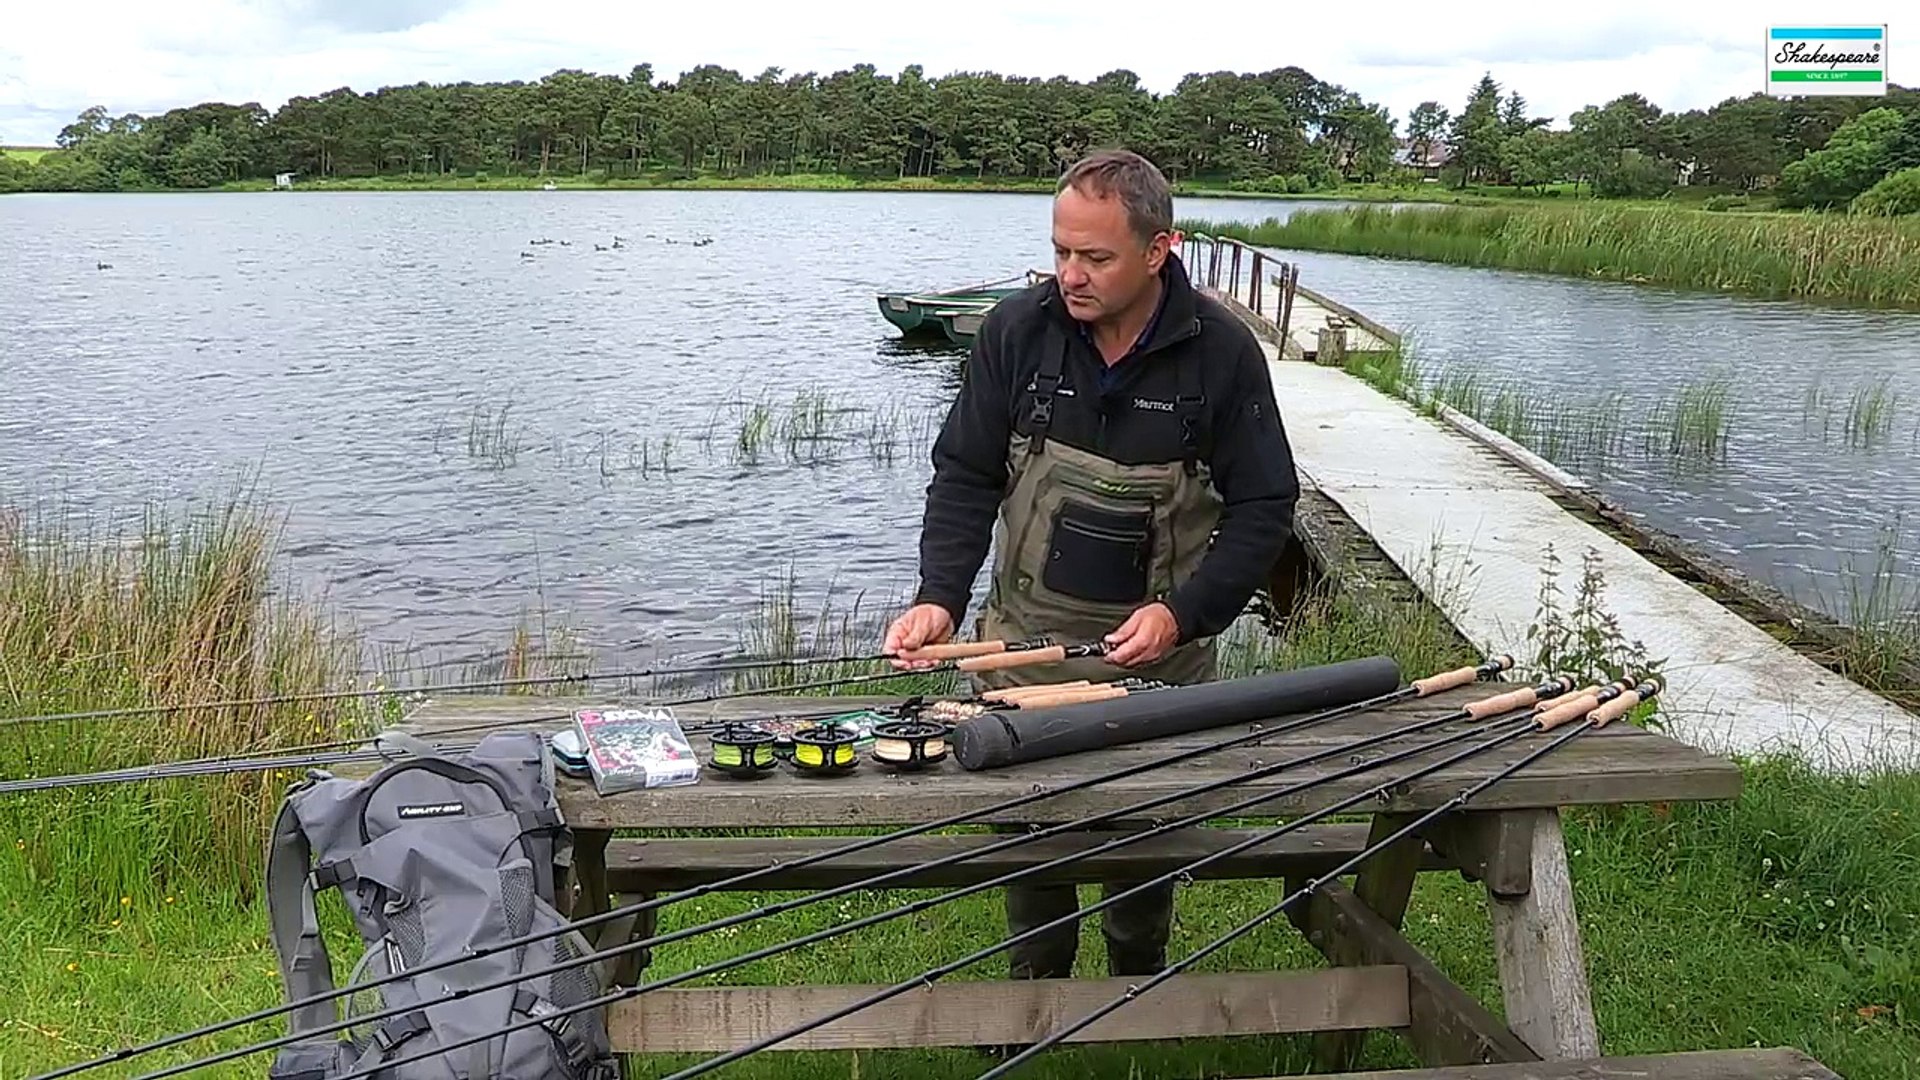 Introducing the New Shakespeare Sigma Supra Fly Rod Range - video